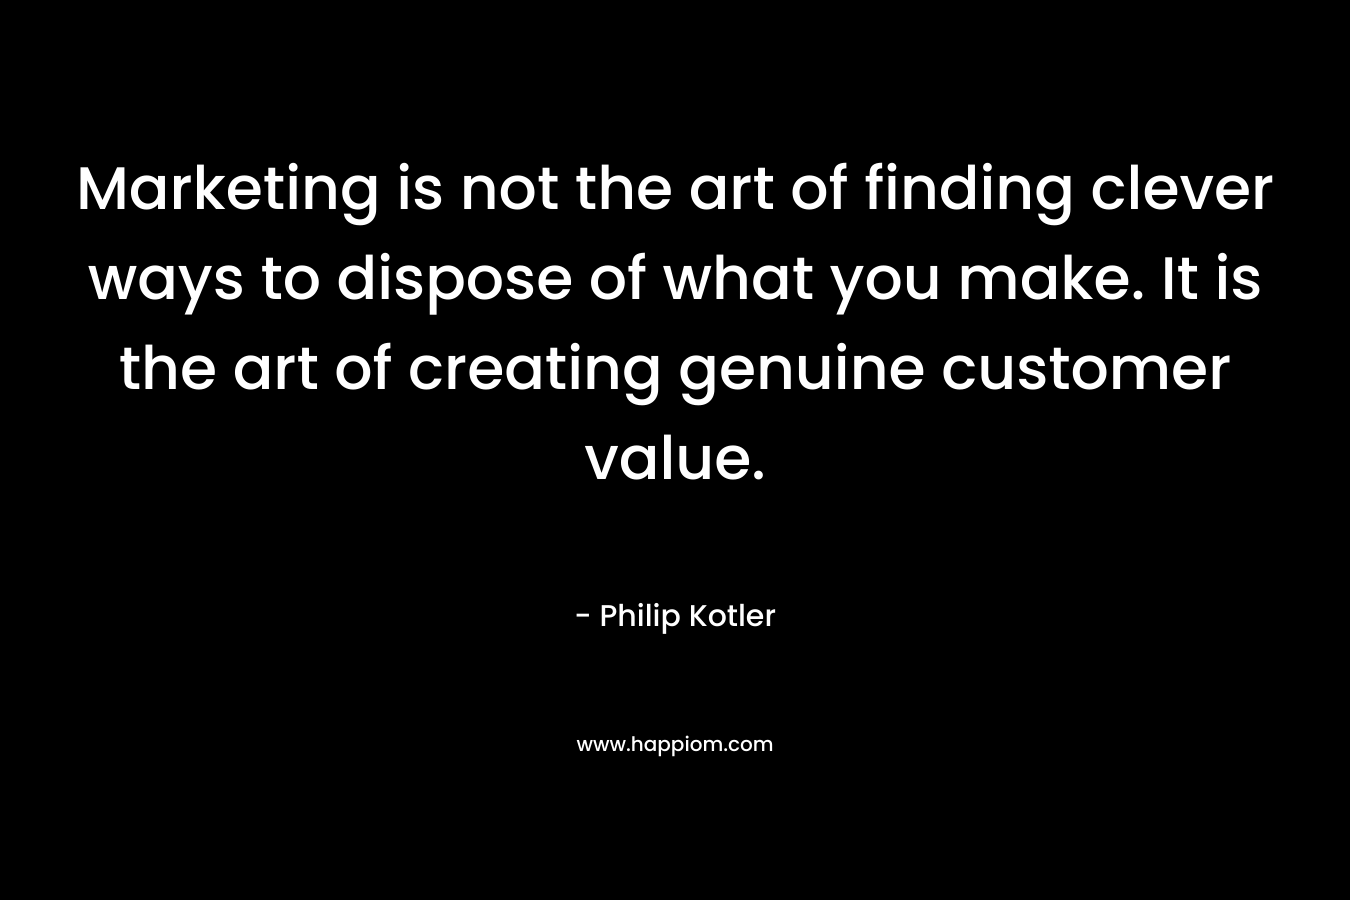 Marketing is not the art of finding clever ways to dispose of what you make. It is the art of creating genuine customer value.